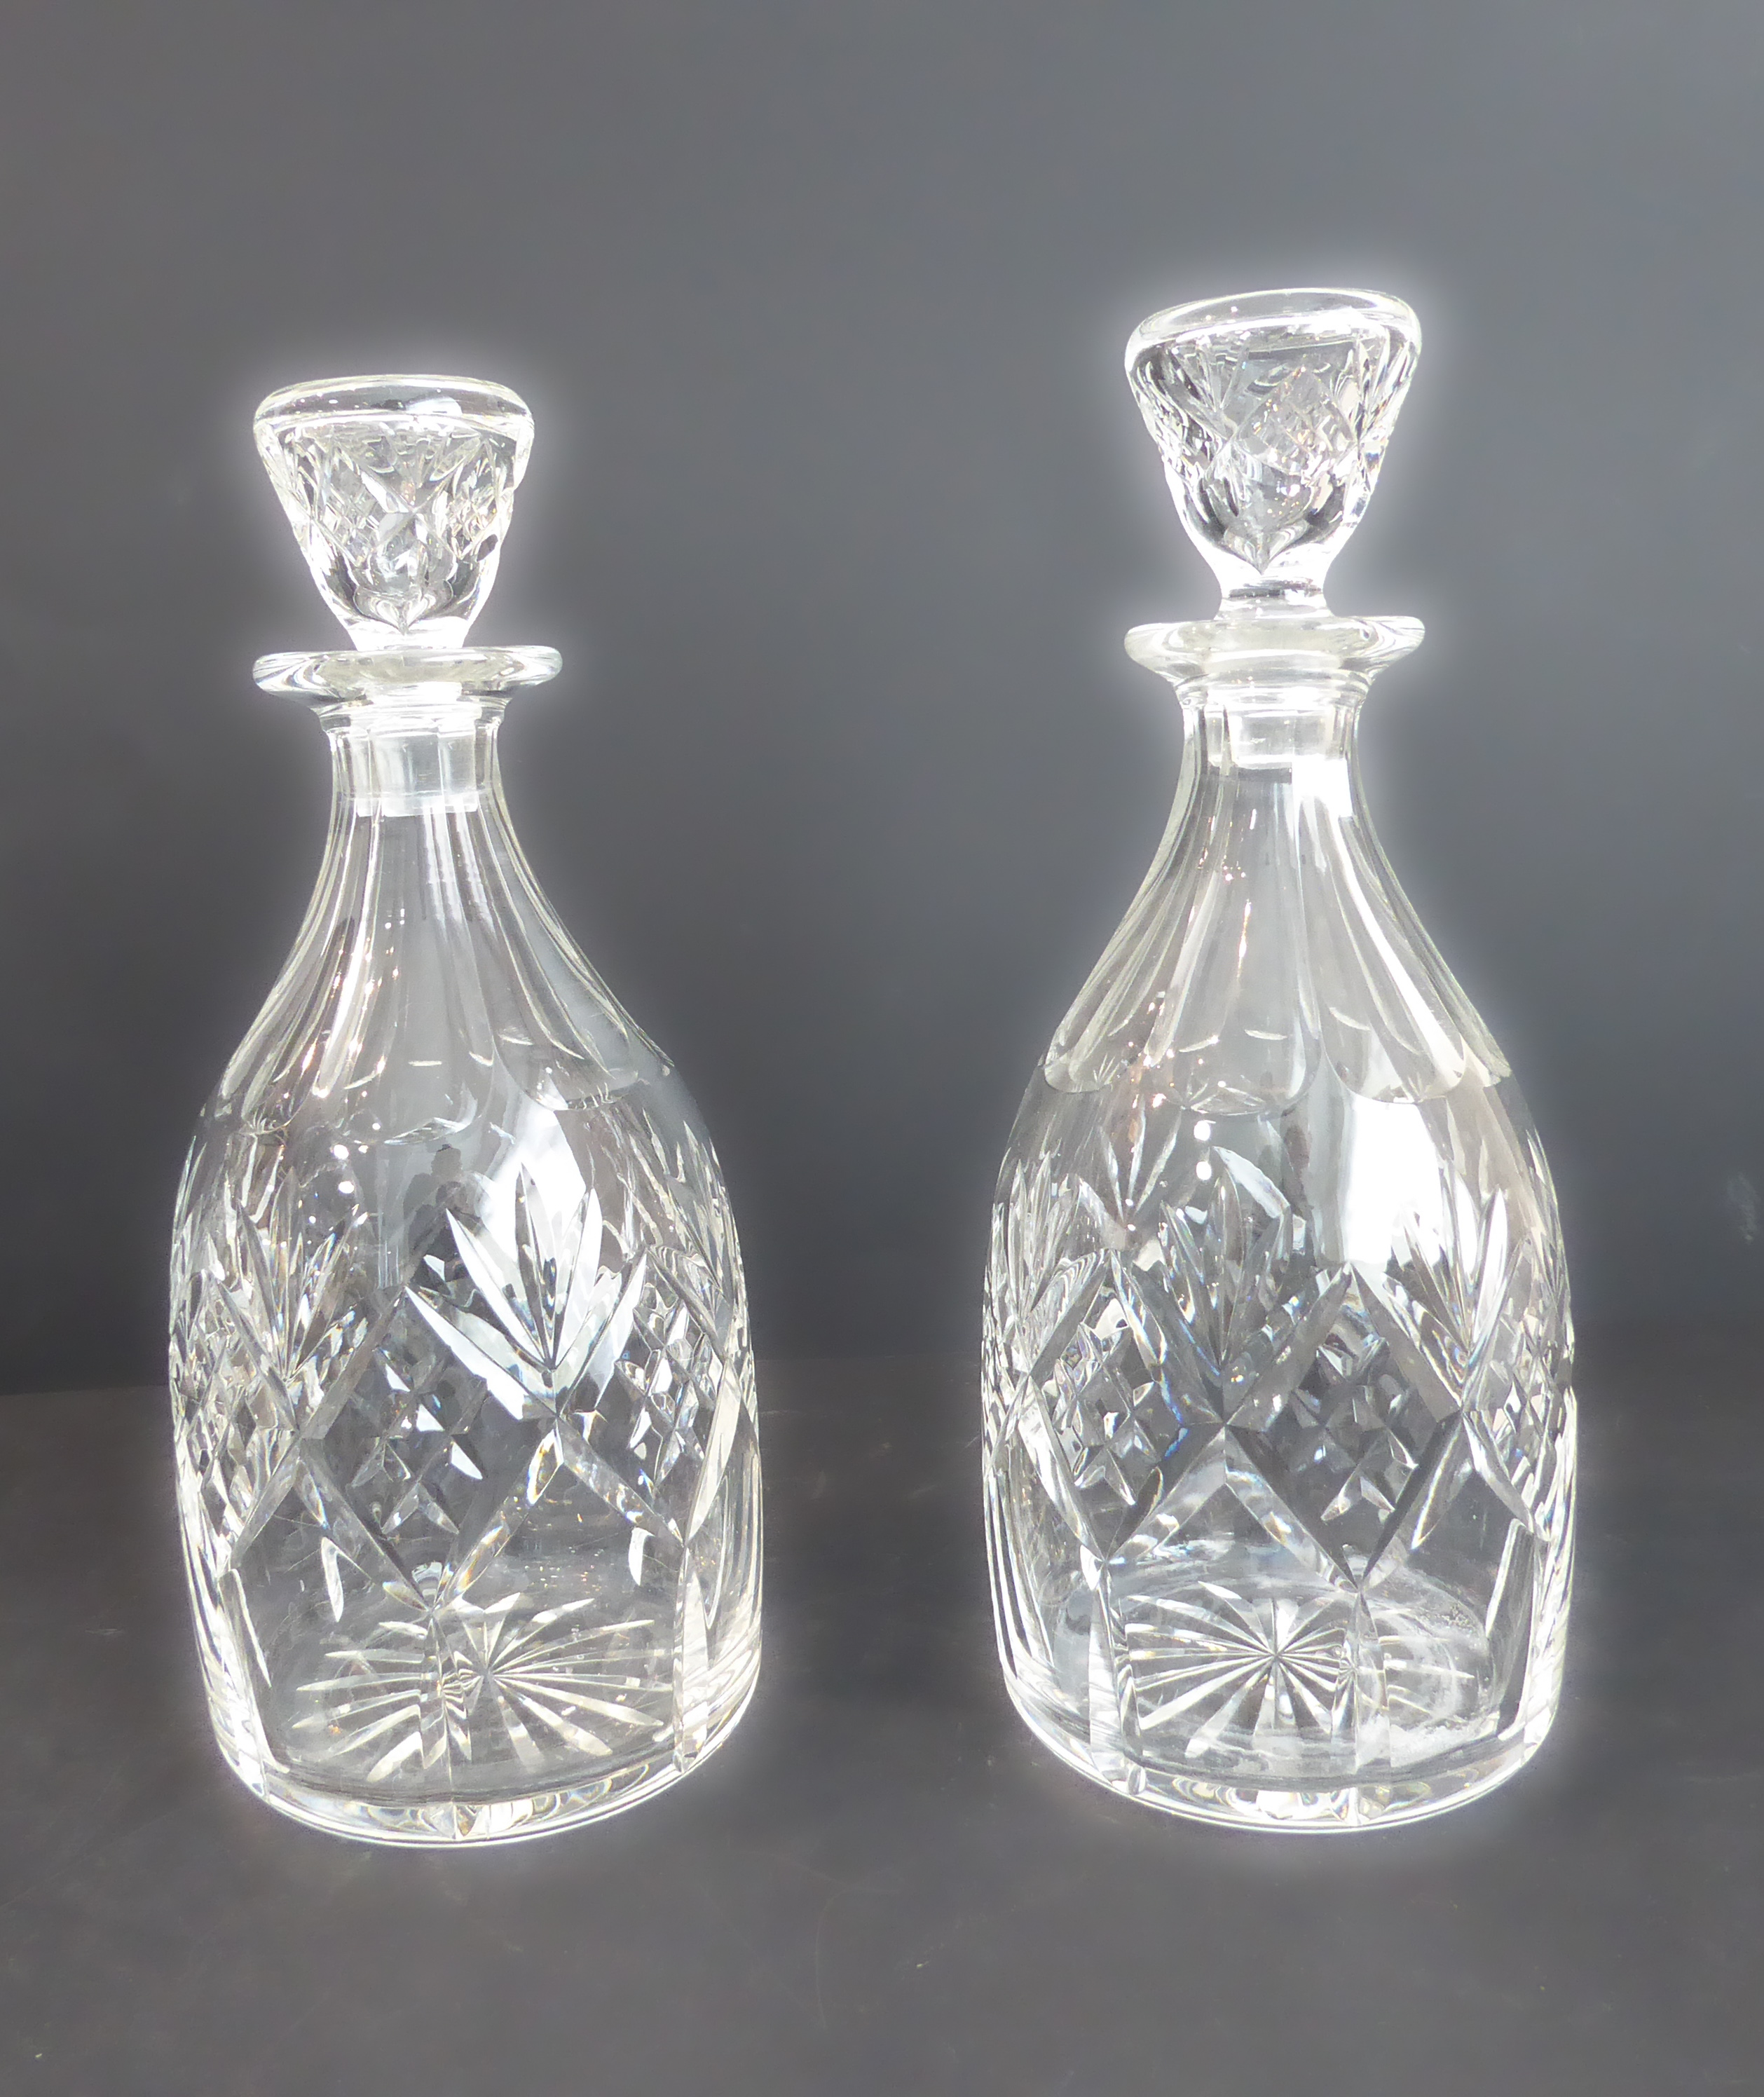 Five quality hand-cut decanters, together with a 19th century style hobnail cut claret jug and a - Image 2 of 6